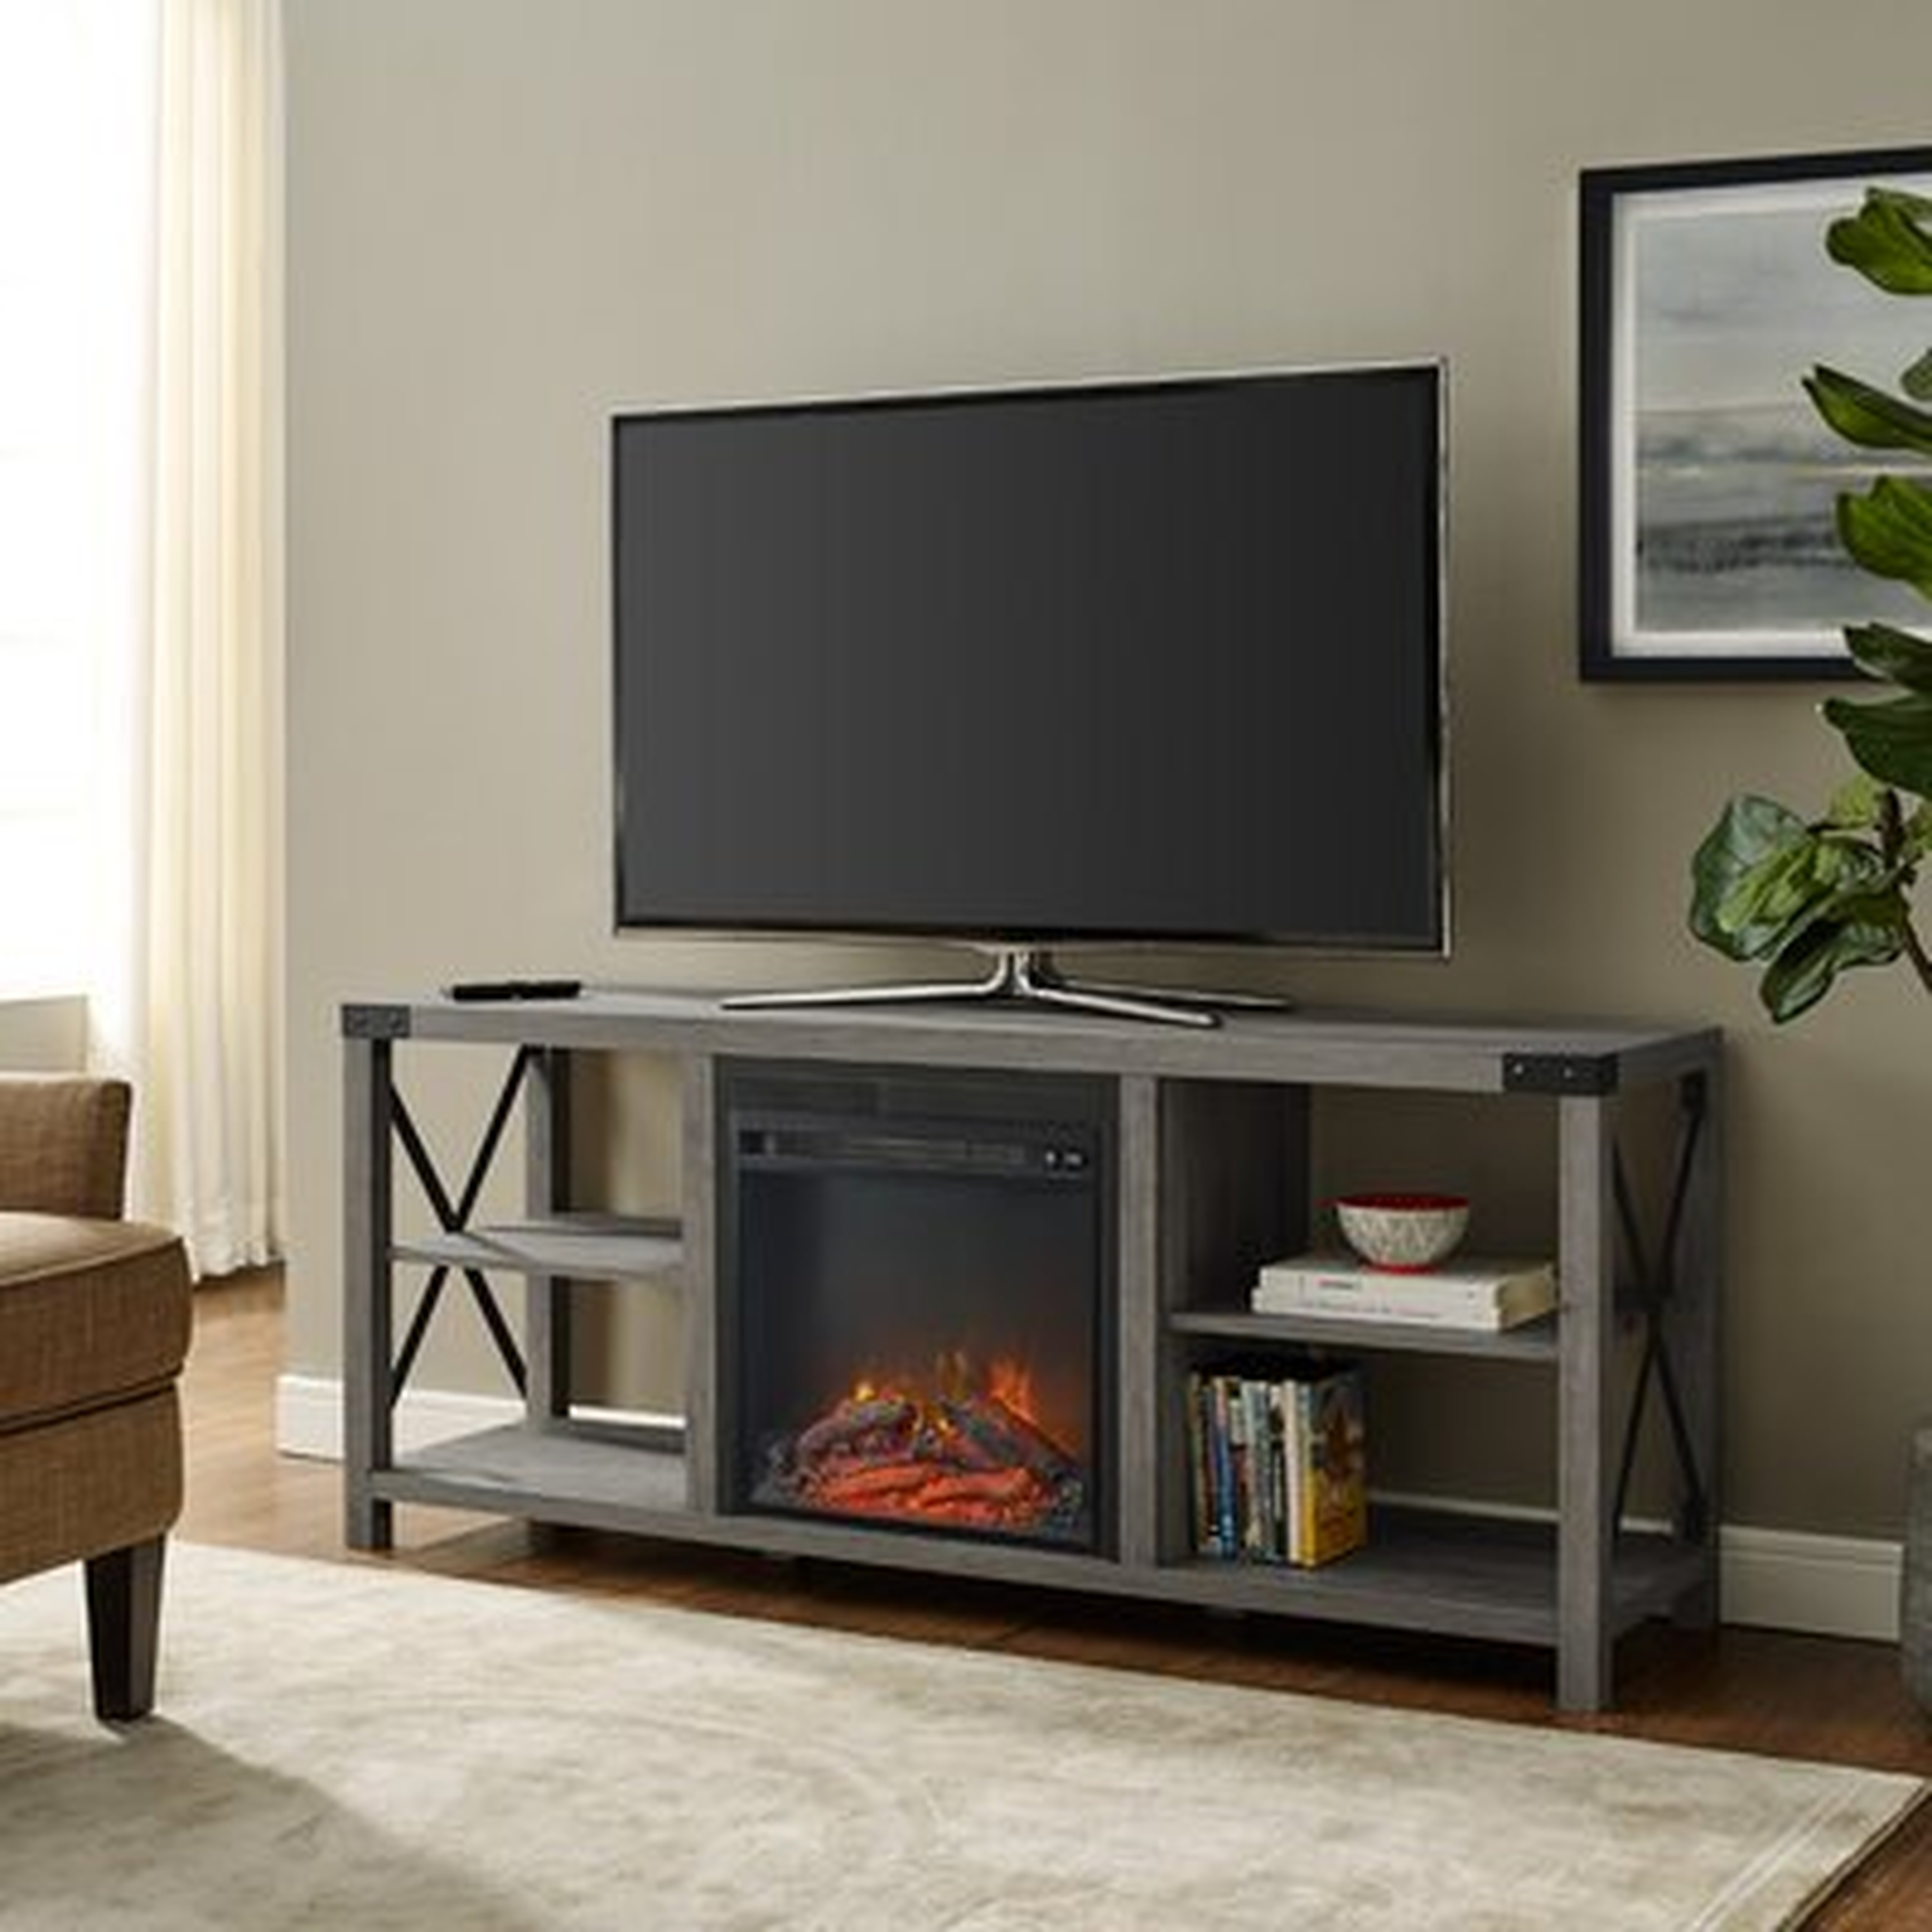 Arsenault TV Stand for TVs up to 65" with Electric Fireplace Included - Wayfair